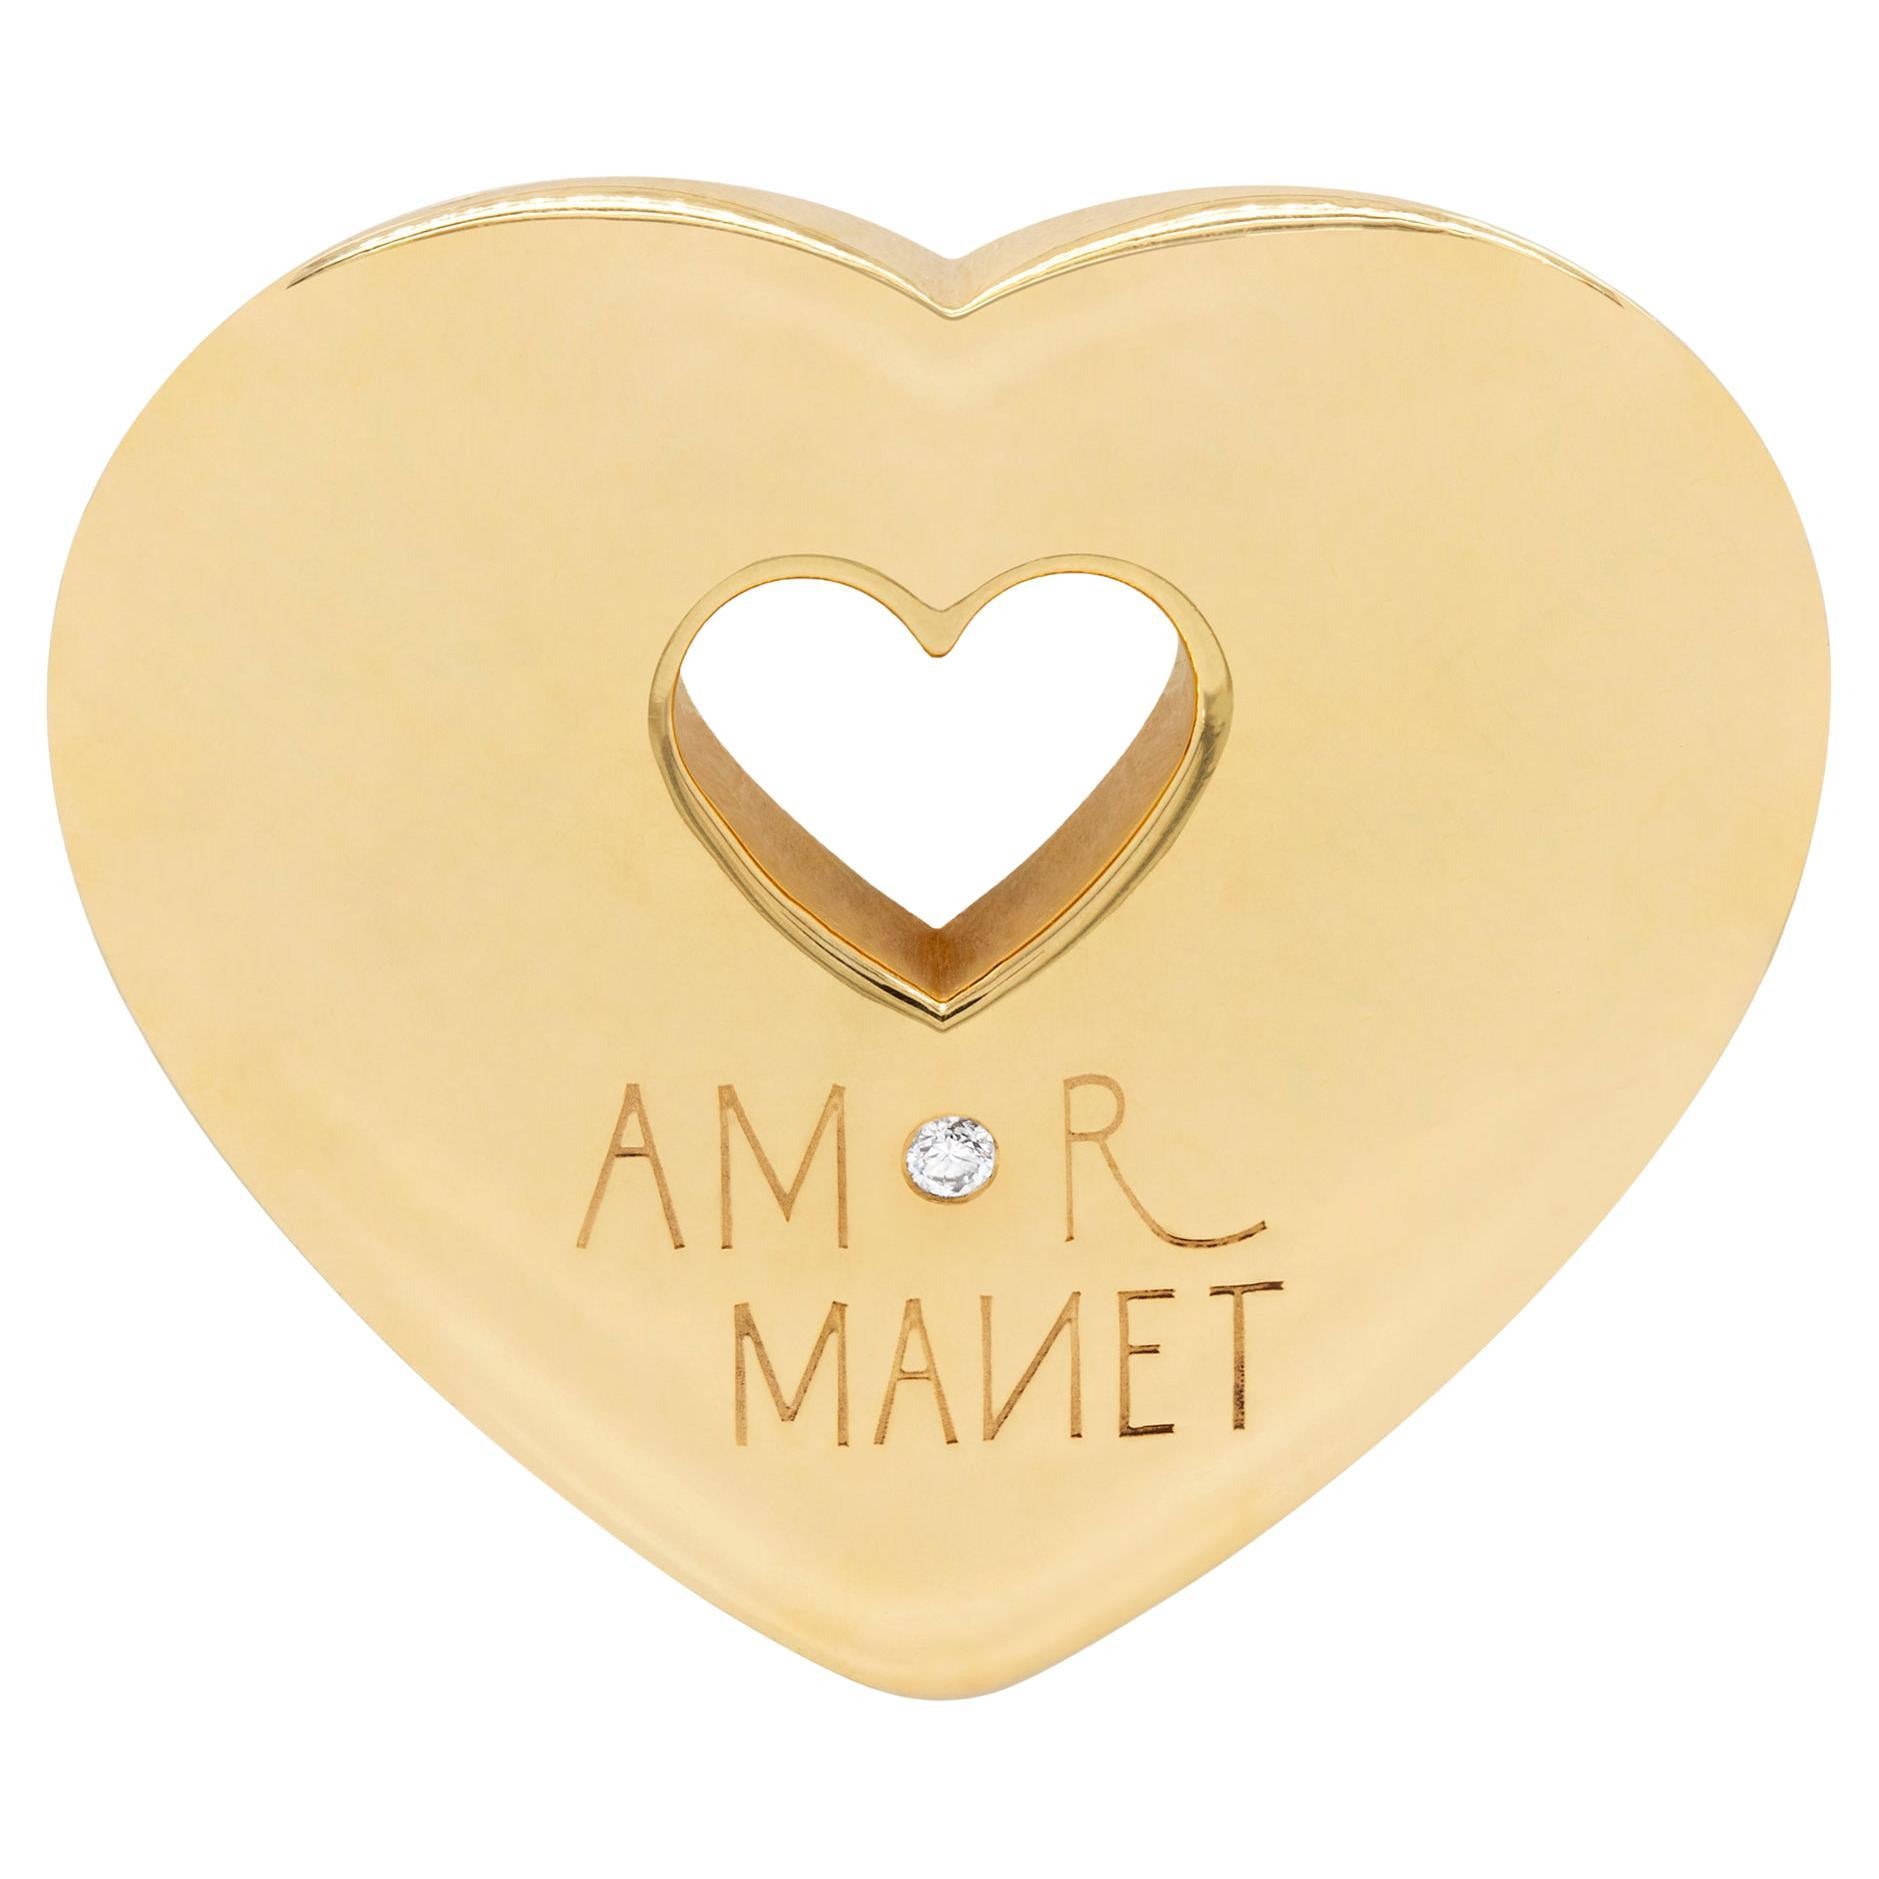 Wempe by Kim Amor Manet Diamond 18 Carat Yellow Gold Heart Pendant For Sale